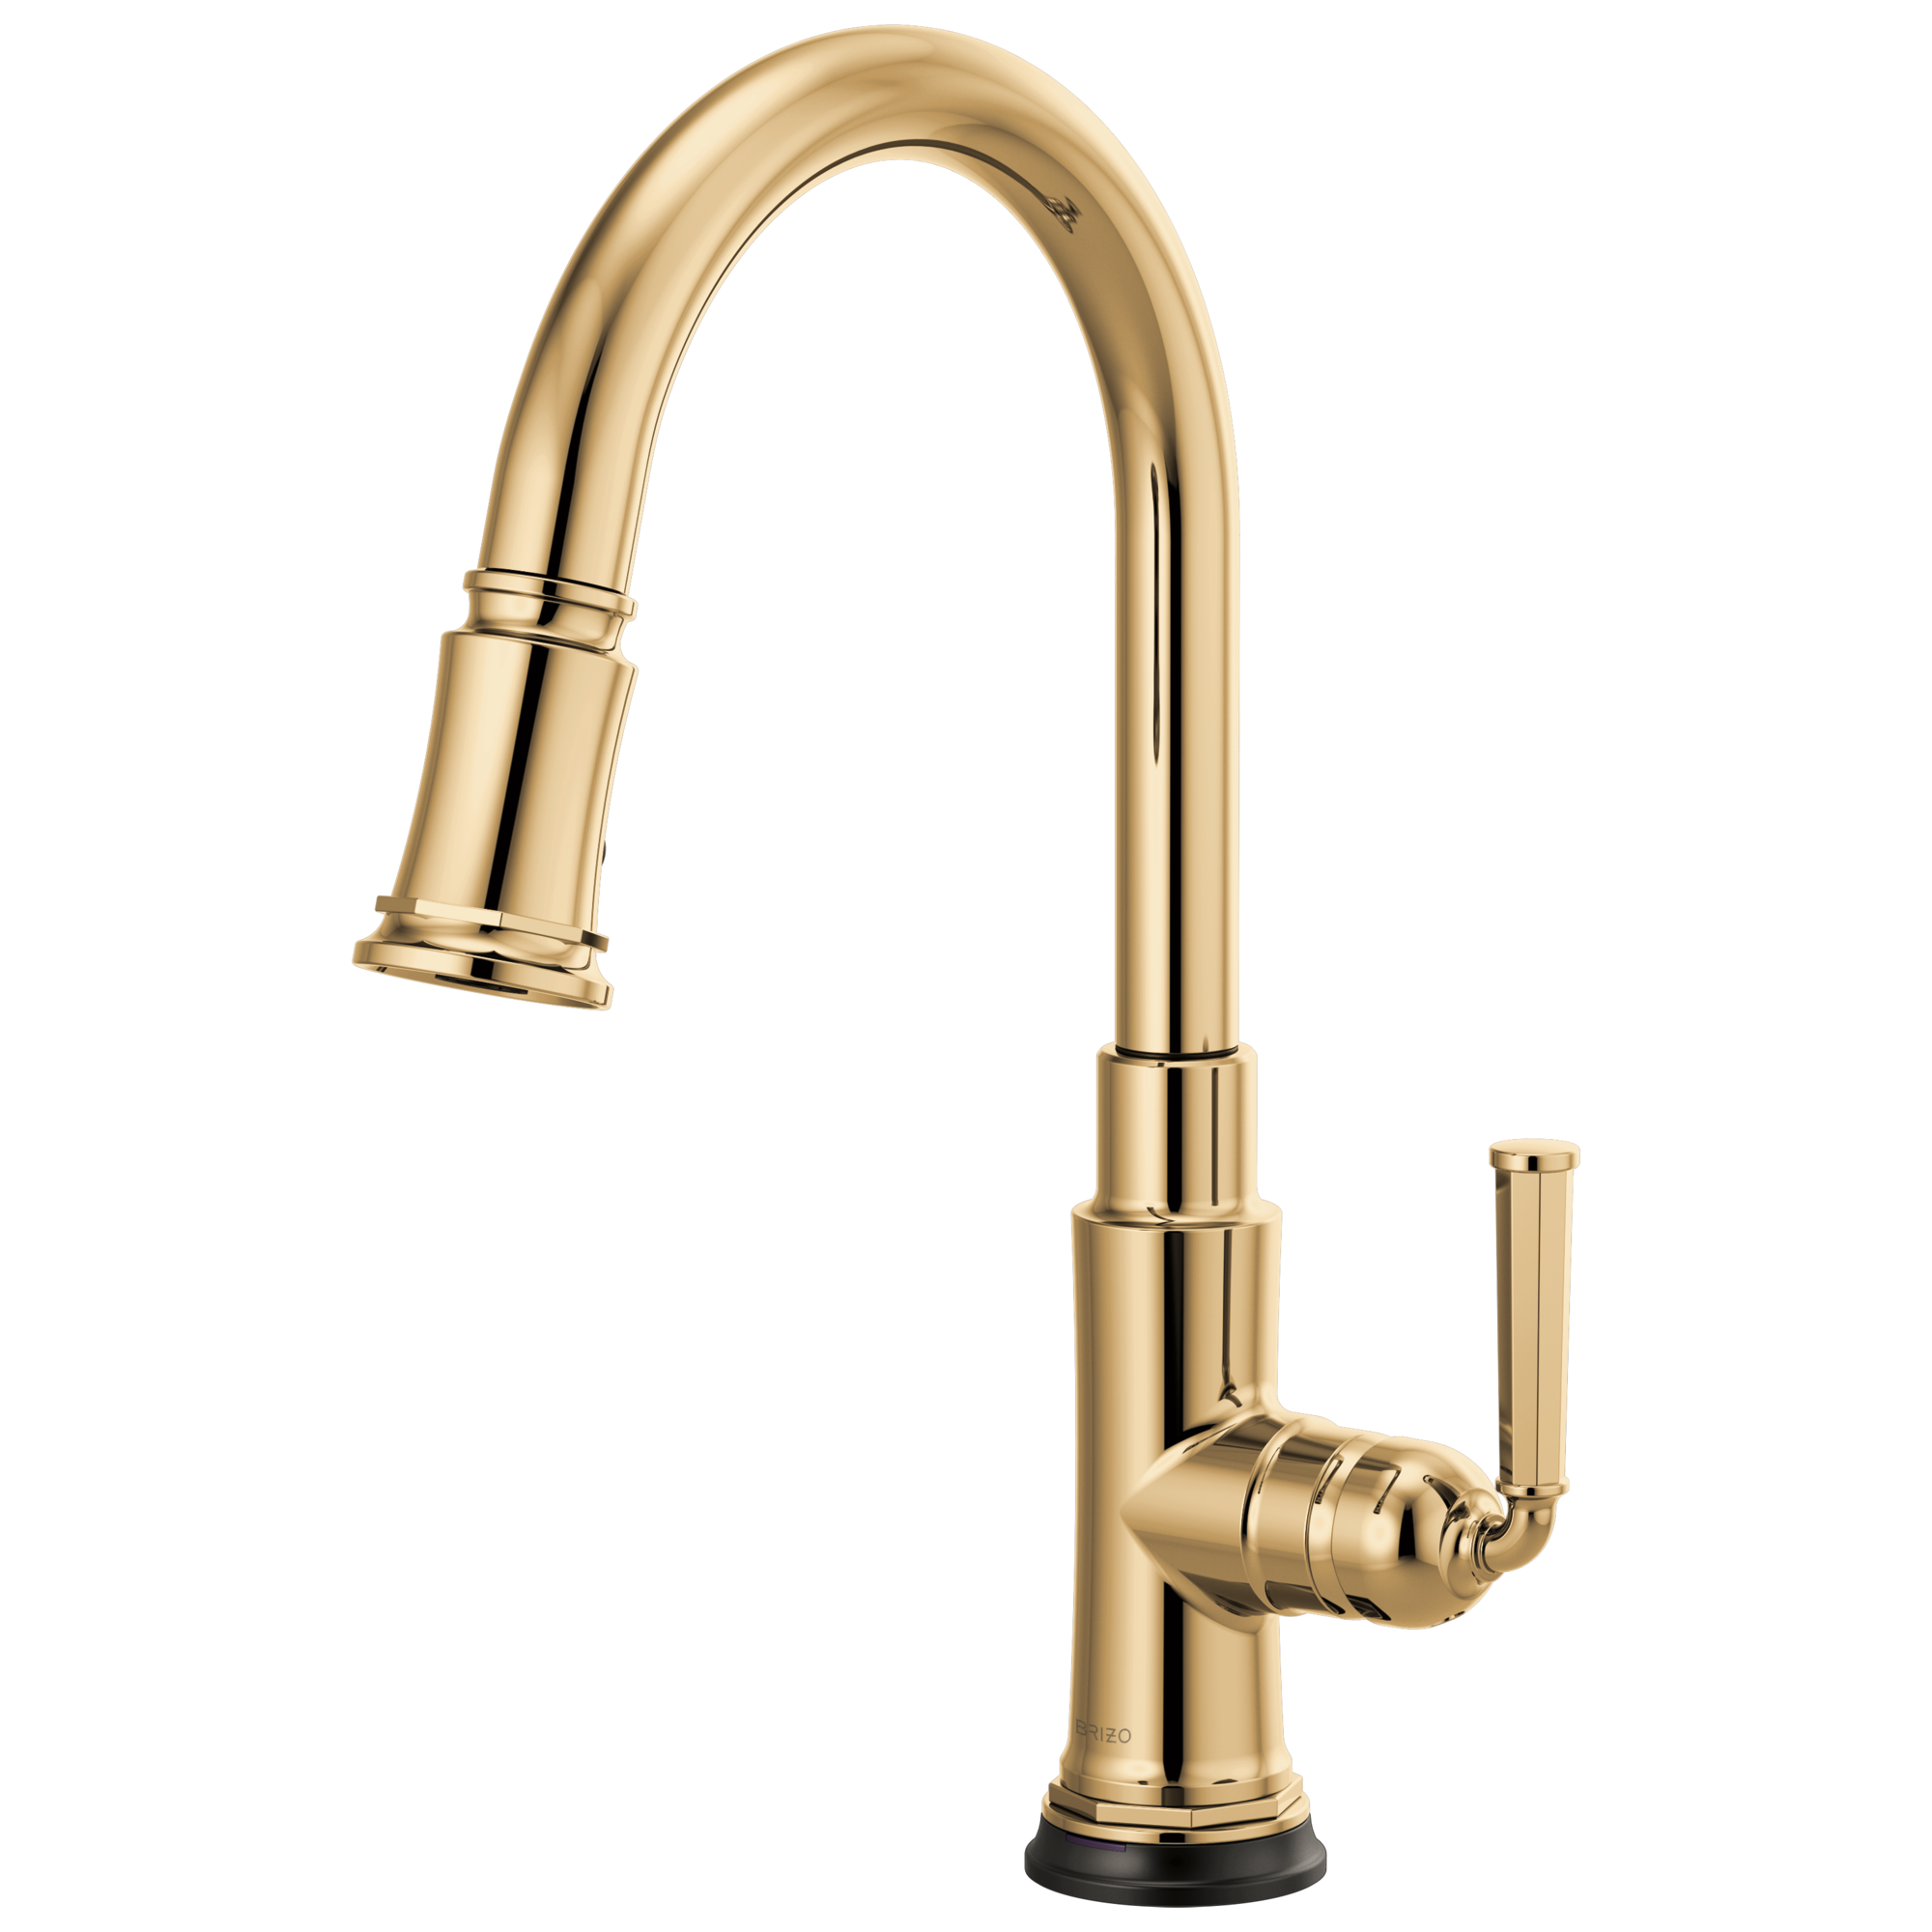 Brizo Rook Smart Touch Pull-Down Kitchen Faucet